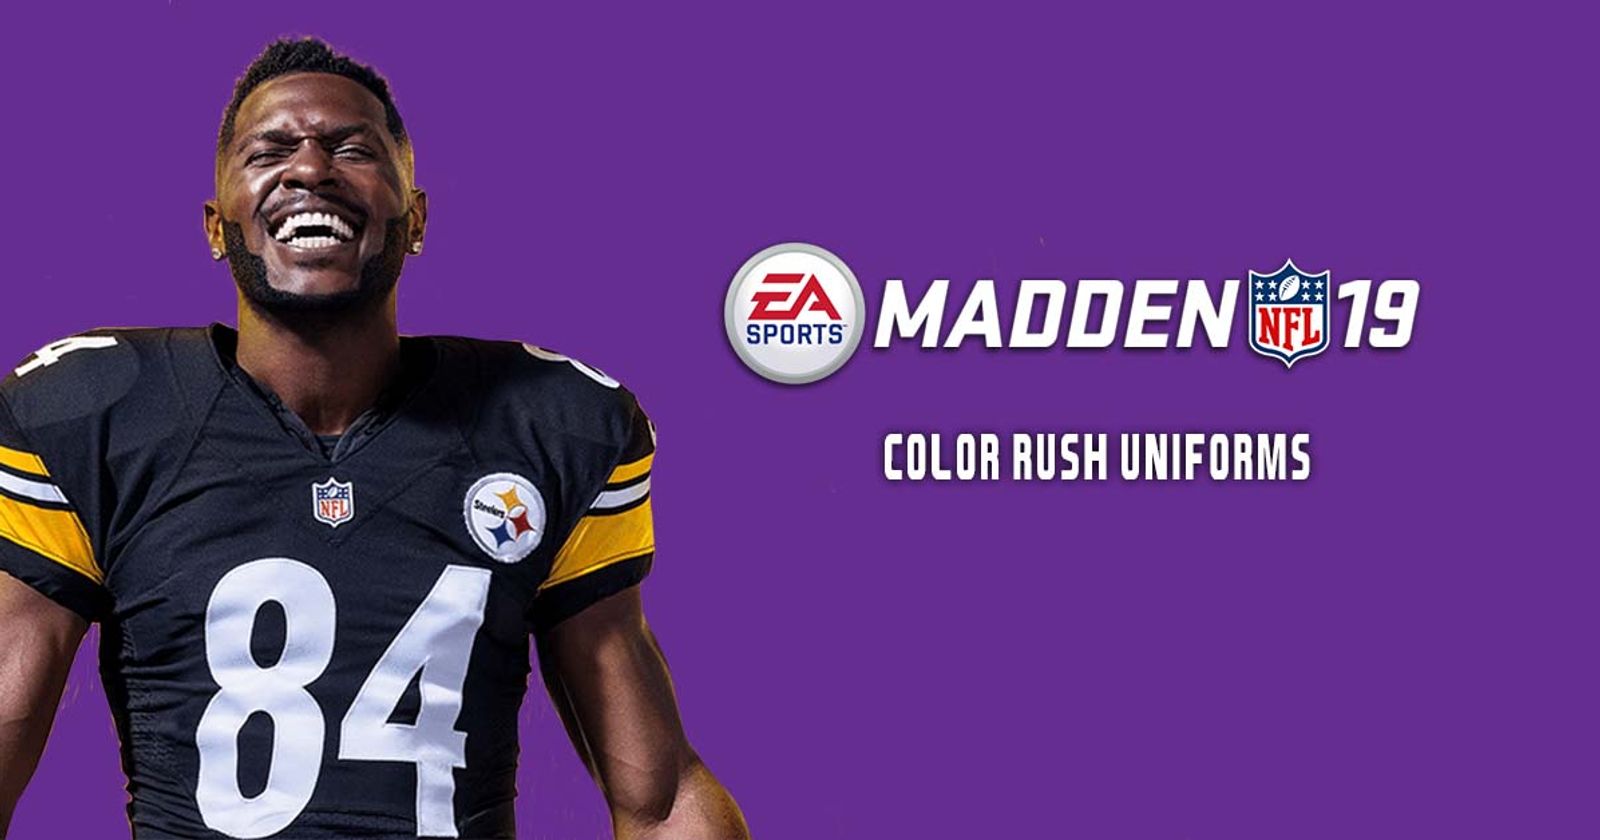 Madden 19: Color Rush Uniforms for all 32 NFL teams